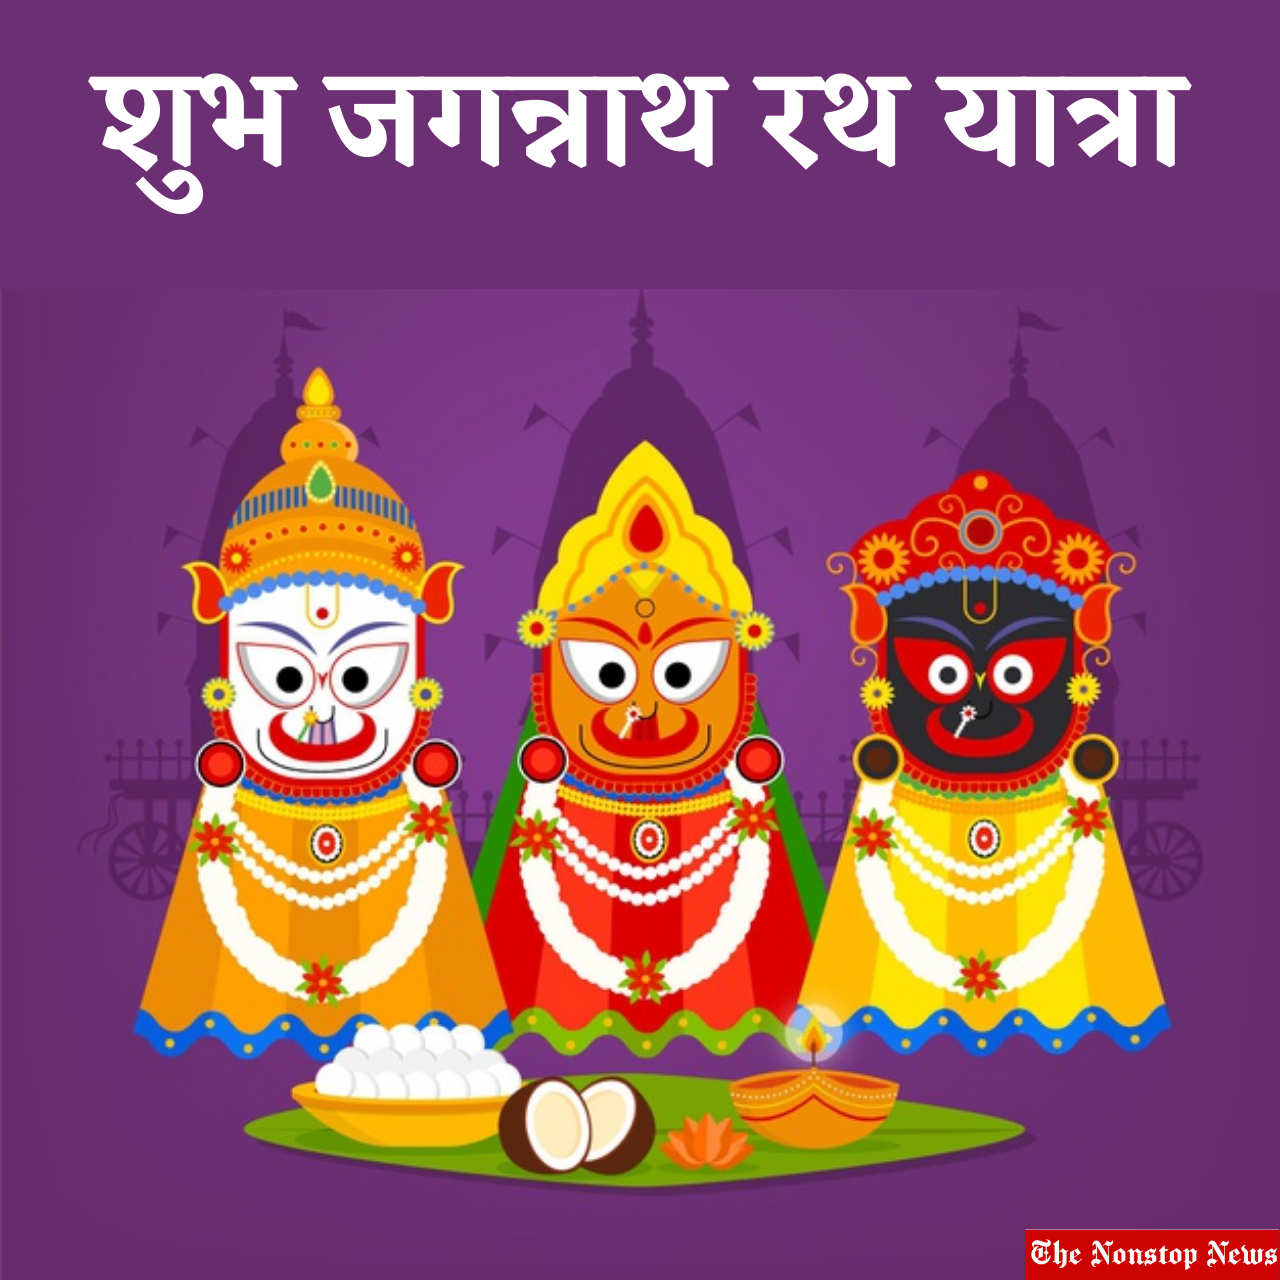 Happy Jagannath Rath Yatra 2021 Hindi Wishes, Greetings, Quotes, Images, Messages to greet your Friends, and Relatives